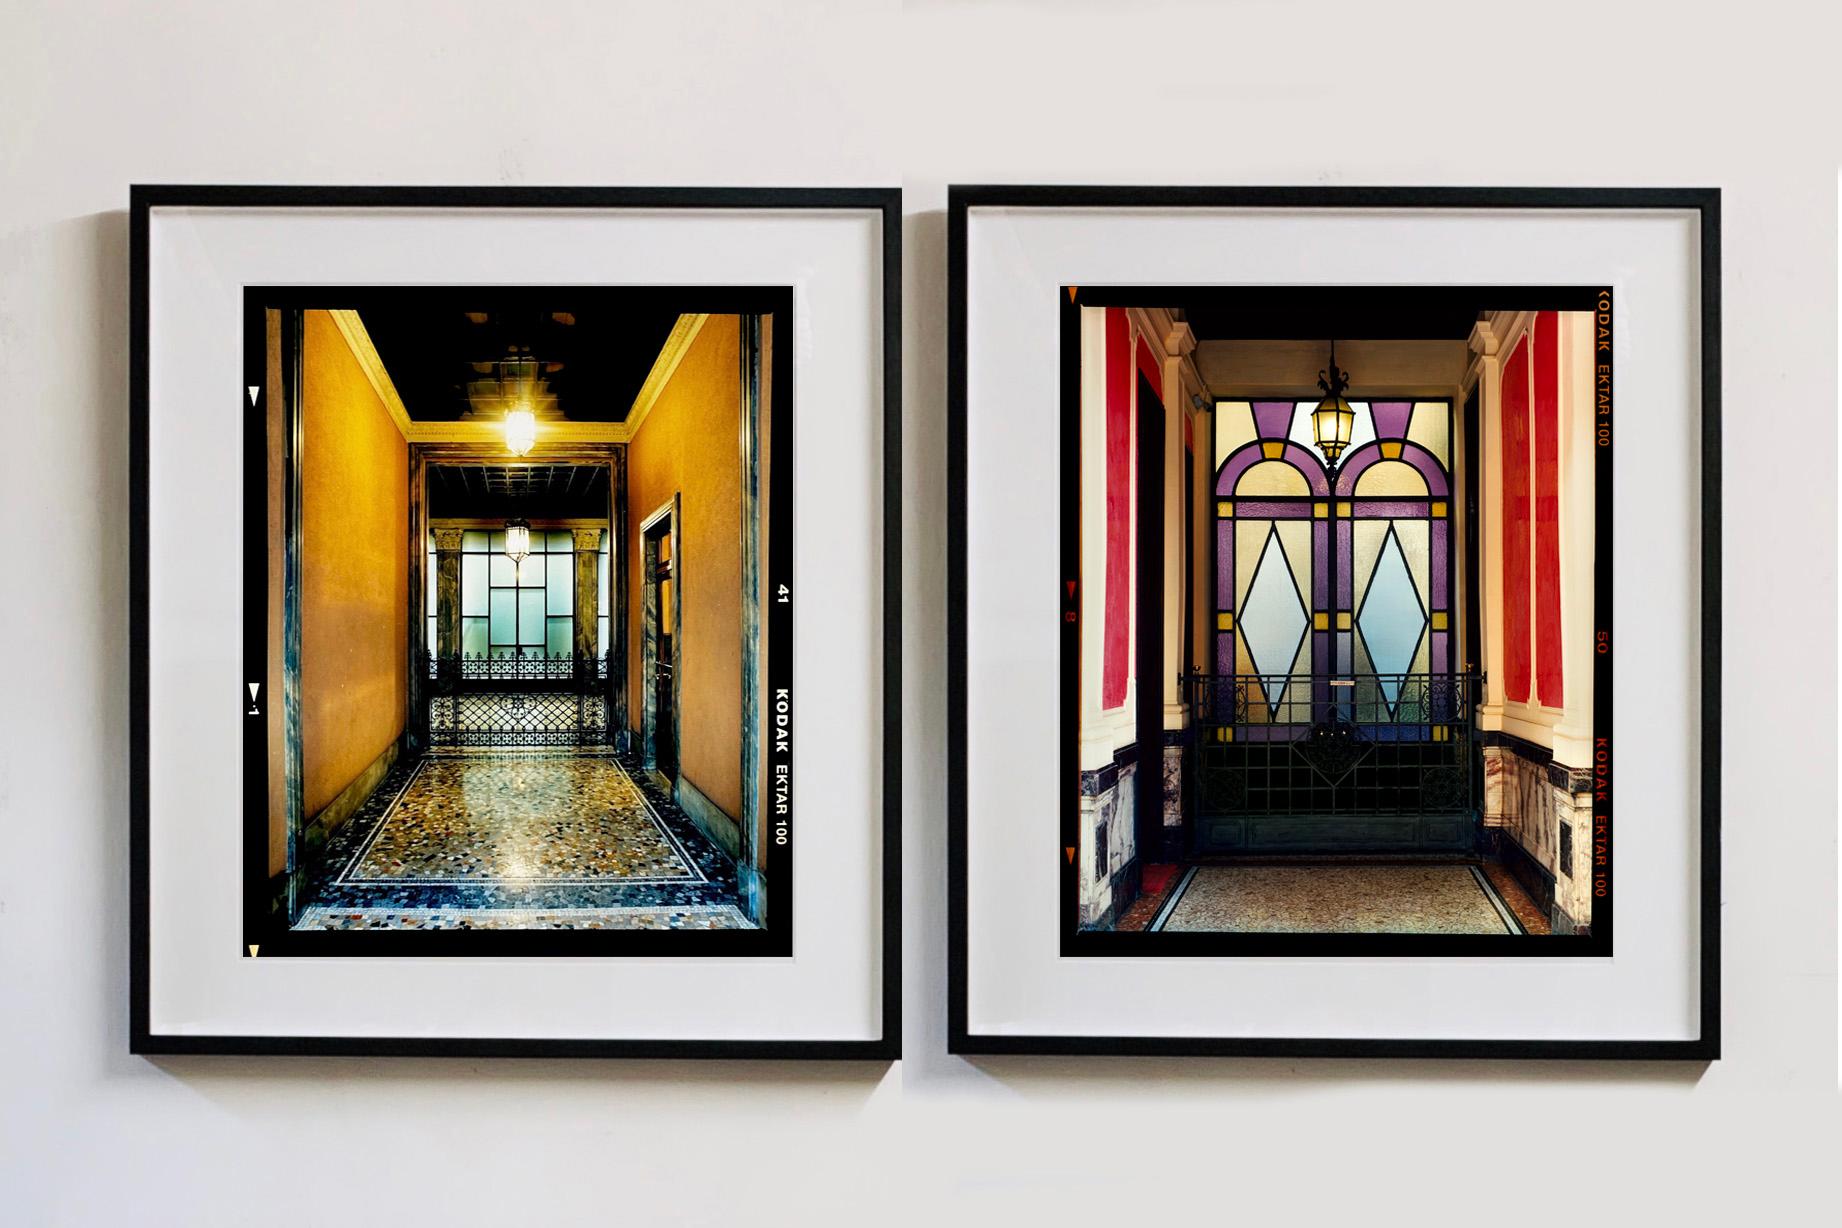 Foyer VII, from Richard Heeps series A Short History of Milan which began as a special project for the 2018 Affordable Art Fair Milan. It was well received and the artwork has become popular with art buyers around the world. Richard continues to add